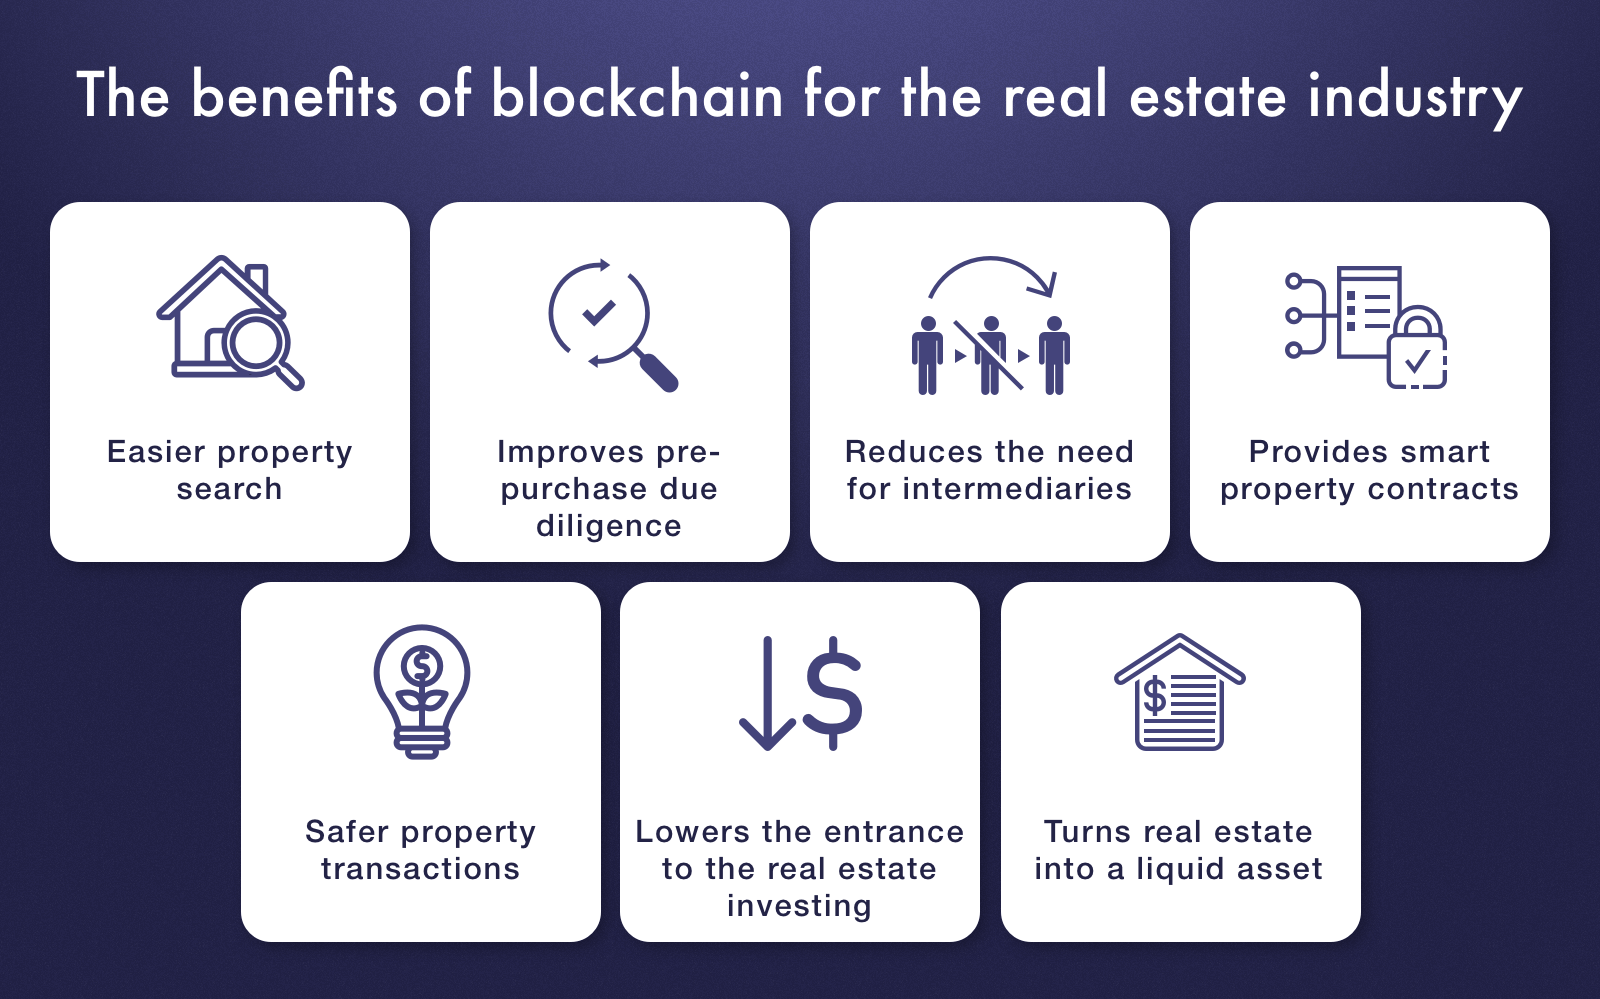 Benefits of blockchain for real estate